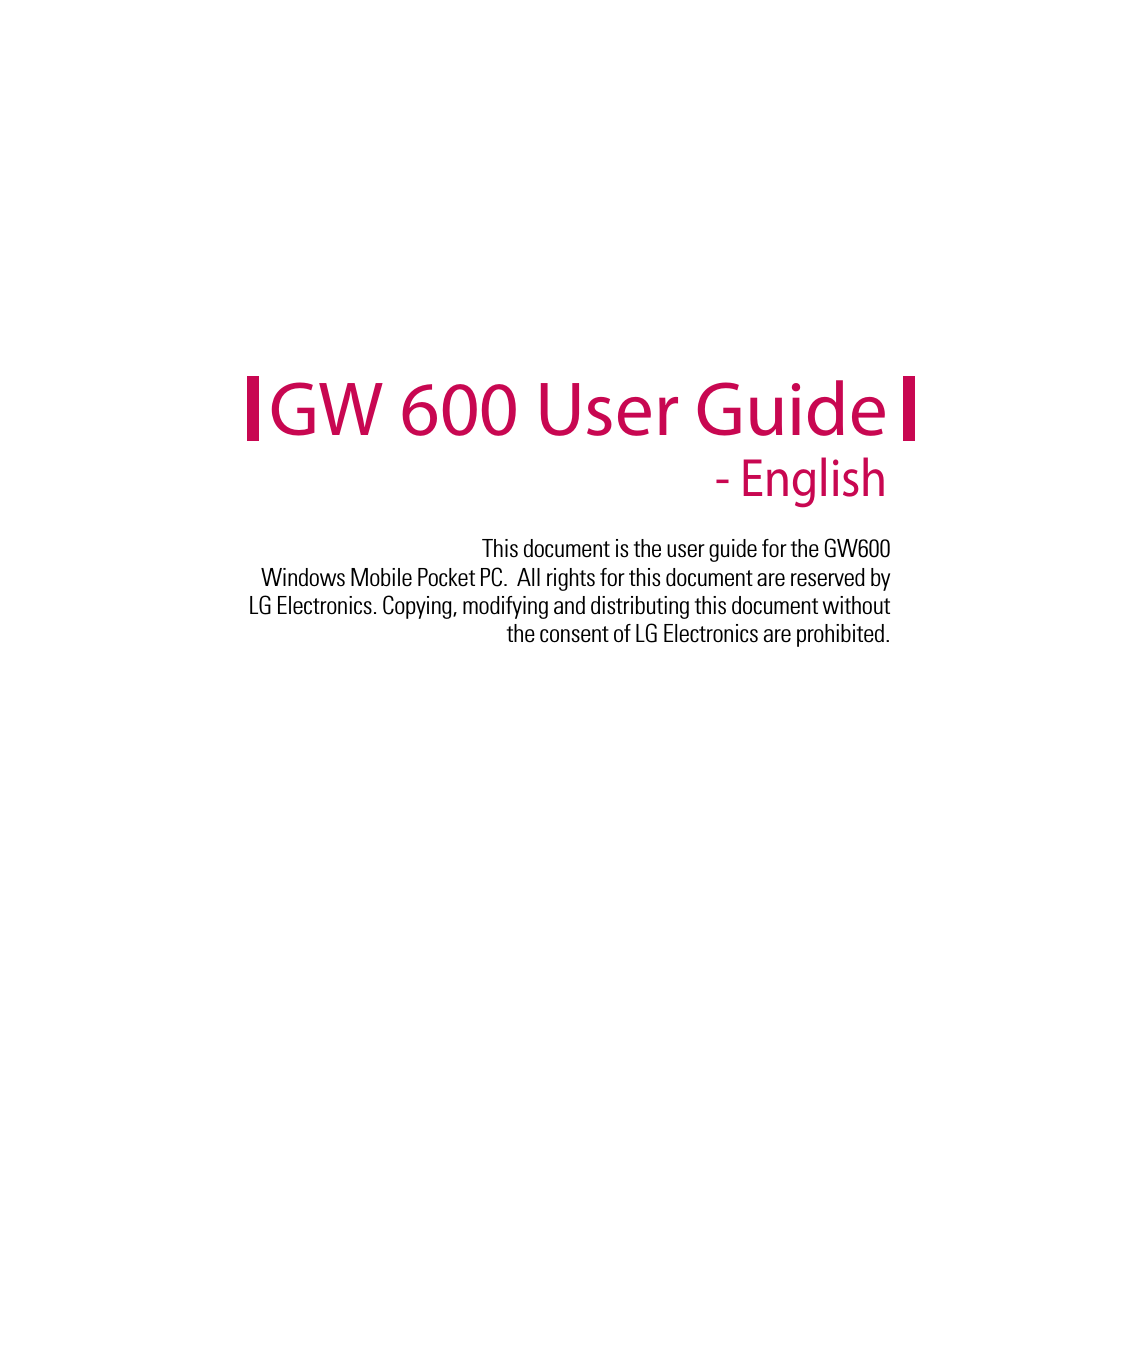 This document is the user guide for the GW600  Windows Mobile Pocket PC.  All rights for this document are reserved by LG Electronics. Copying, modifying and distributing this document without the consent of LG Electronics are prohibited.GW 600 User Guide - English